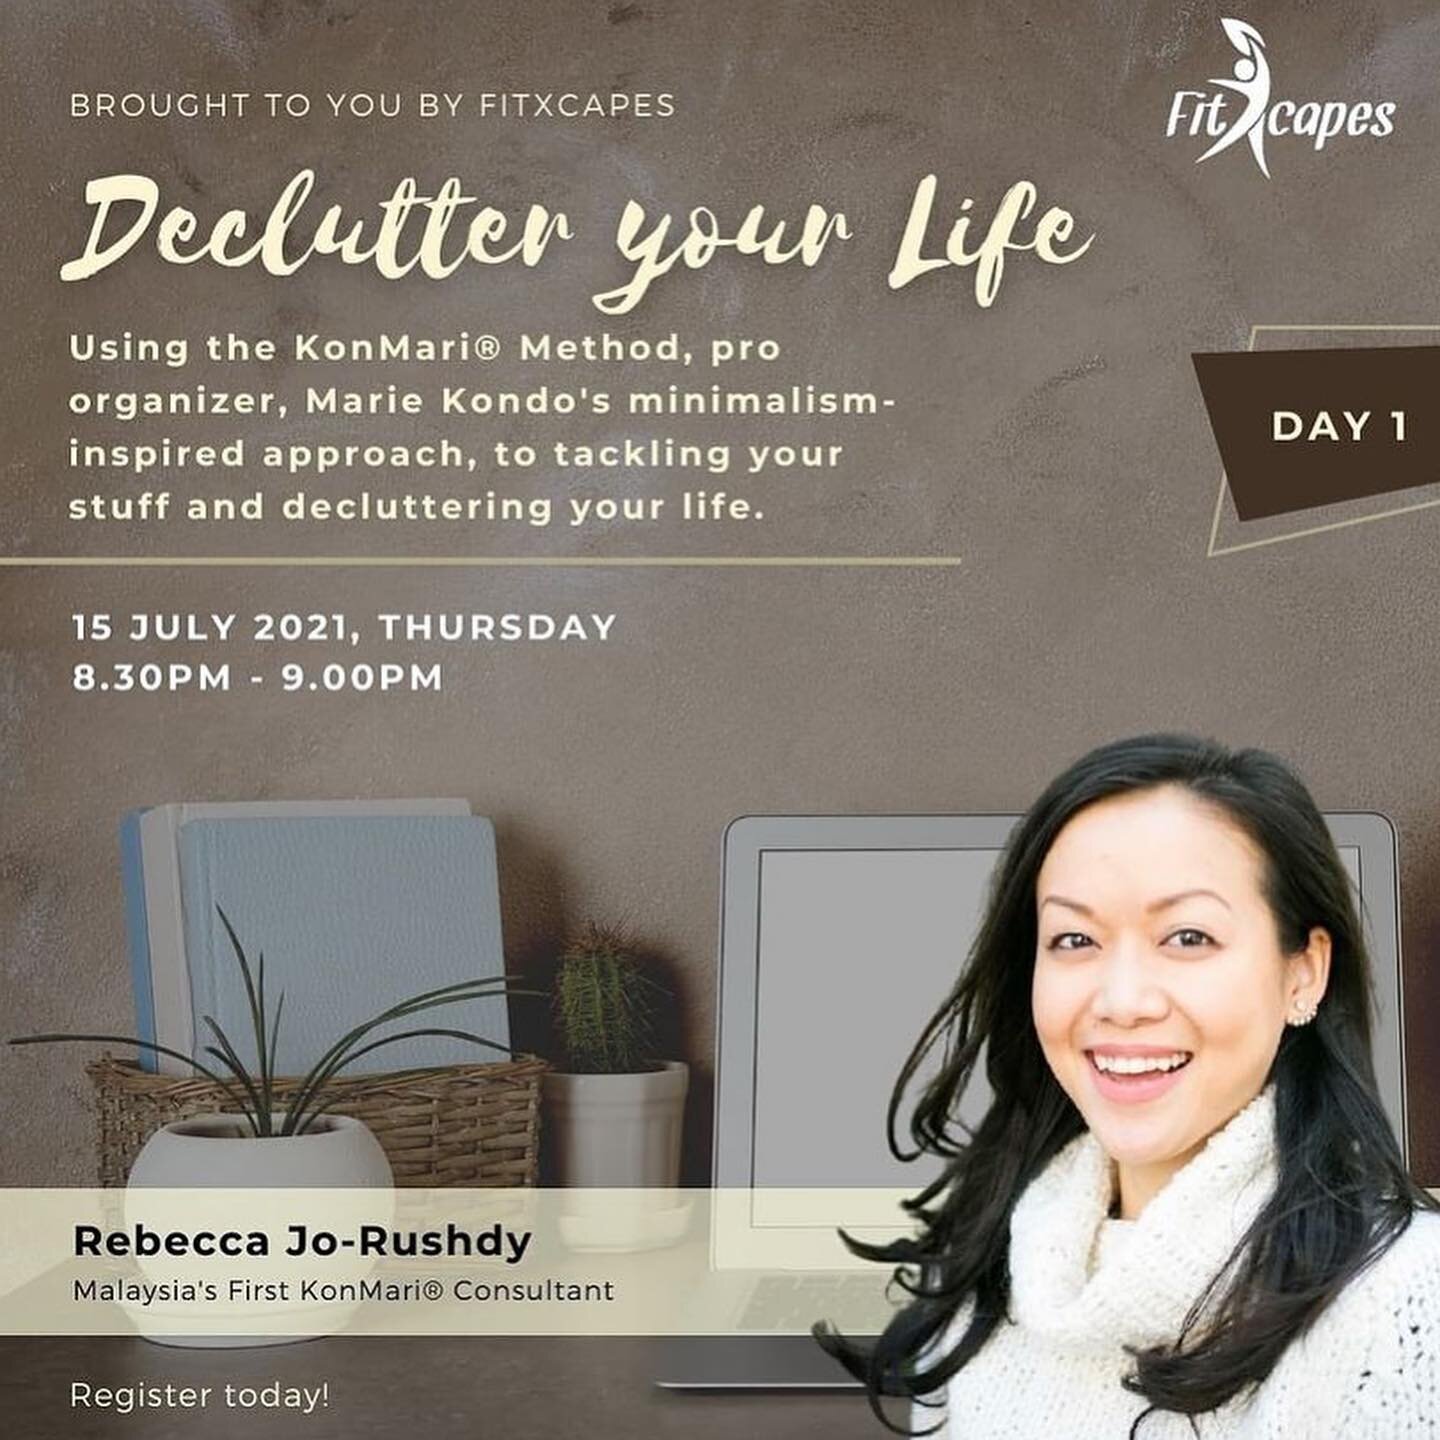 Thank you so much @fitxcapes for the opportunity to share the KonMari Method&reg; and kick off 10 Days of Wellness!

There&rsquo;s still 5 more days left - tonight is budget friendly immunity boosters with @kit_mah and there are other free classes fr